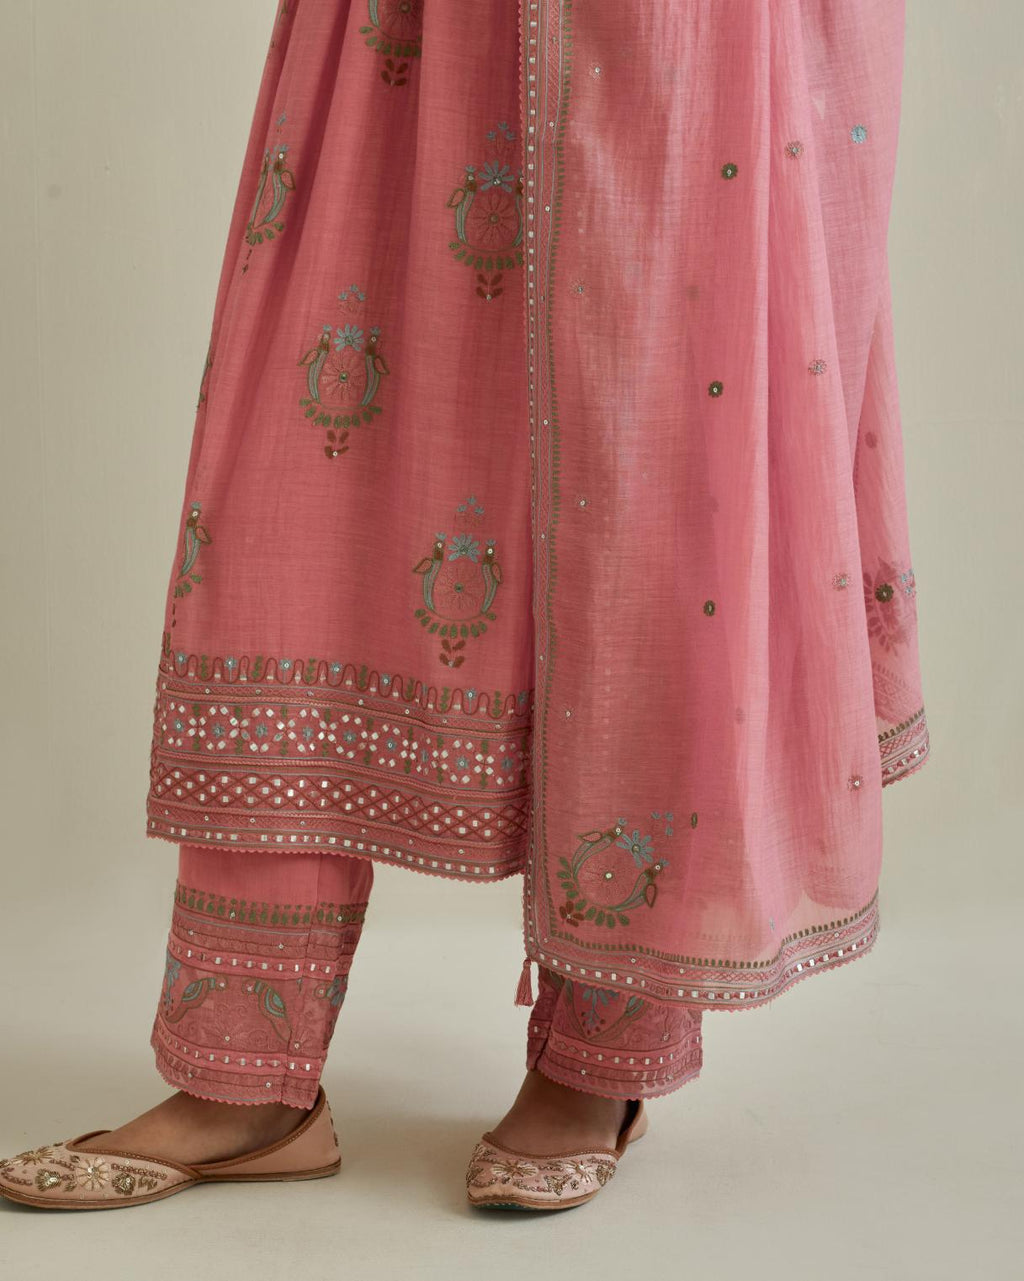 Pink cotton chanderi embroidered kurta dress set with V neck, yoke and fine gathers at empire line.